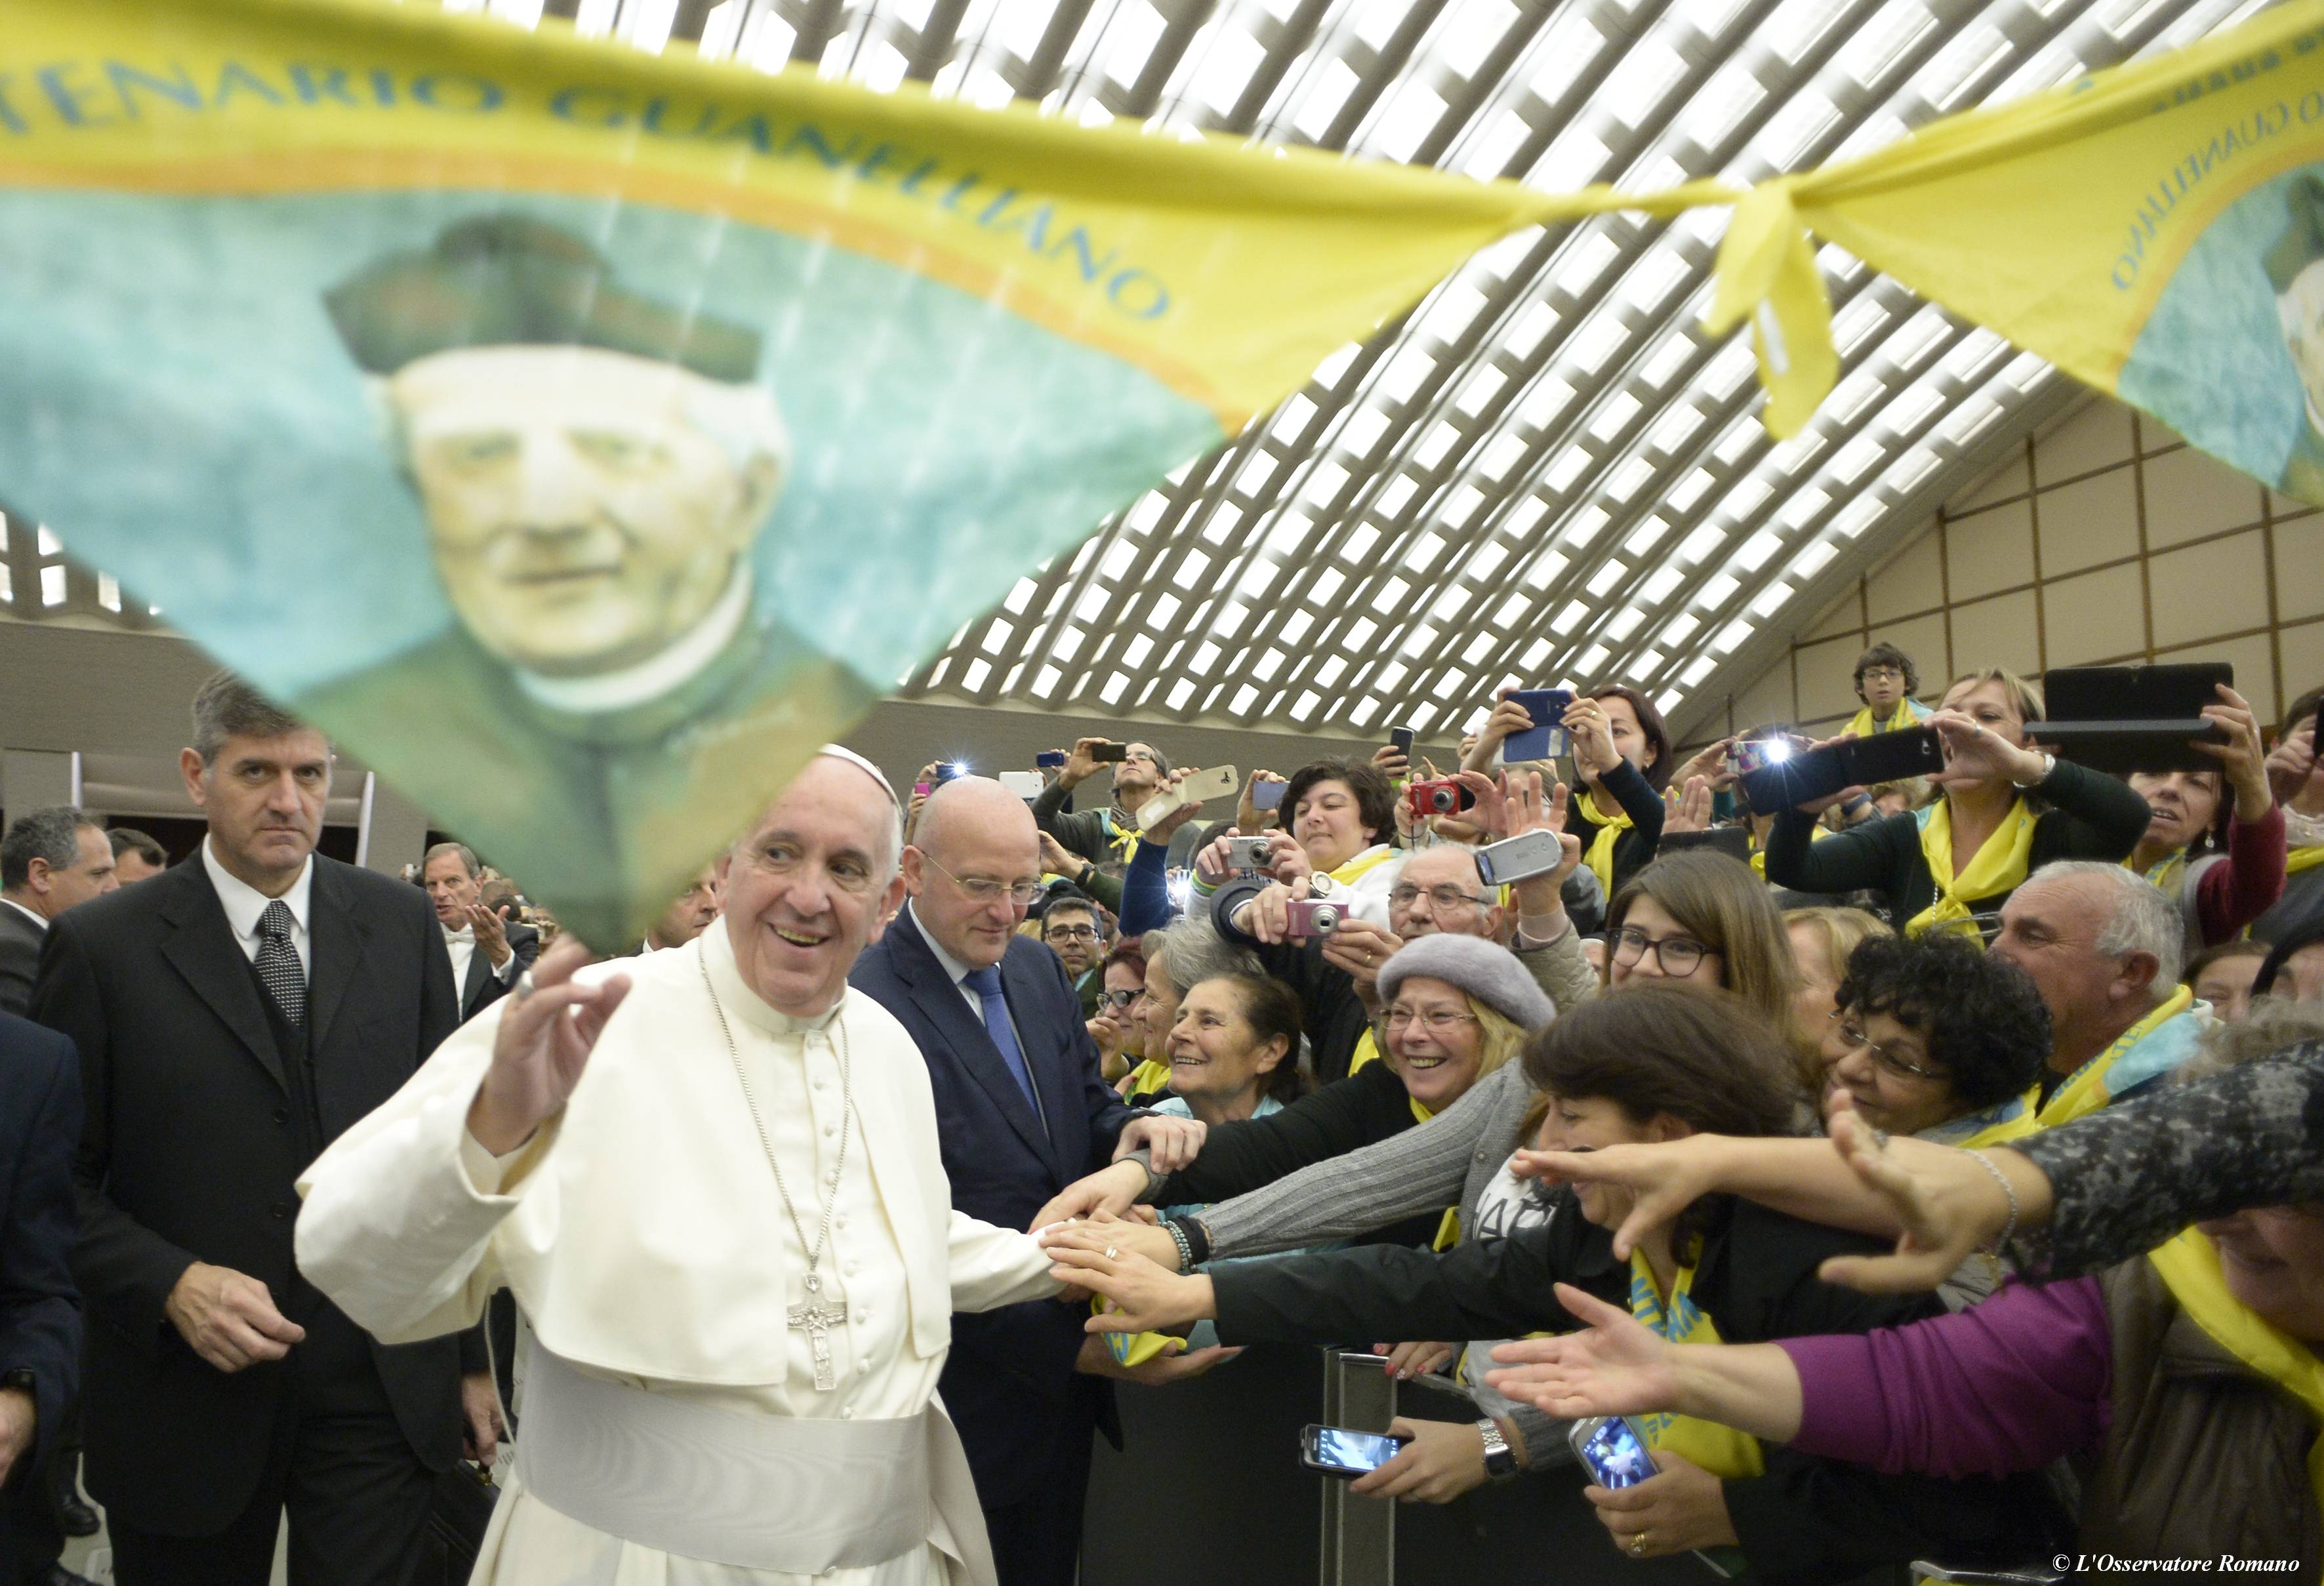 Pope Francis during the audience with members of the Don Guanella Charity foundation in the Paul VI hall